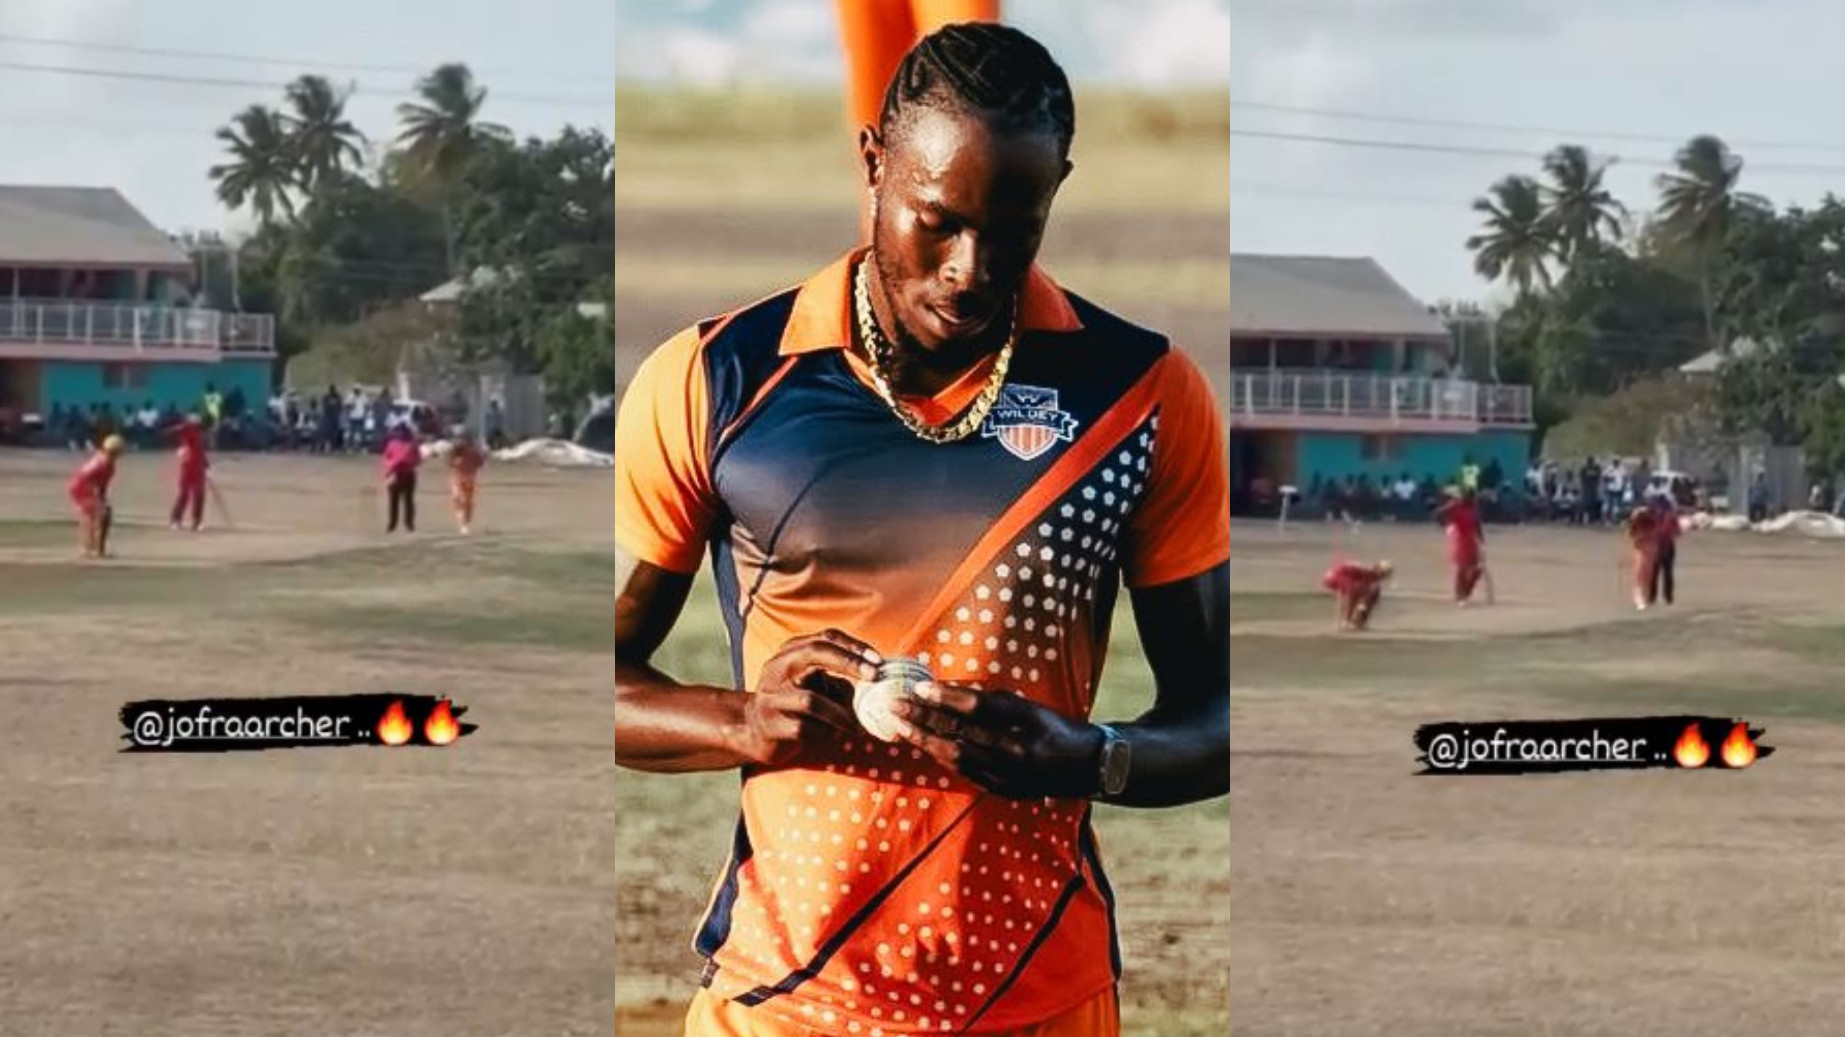 WATCH- Jofra Archer breathes fire in BCA T20 Cup game in Barbados, sends stumps cartwheeling; Fans react